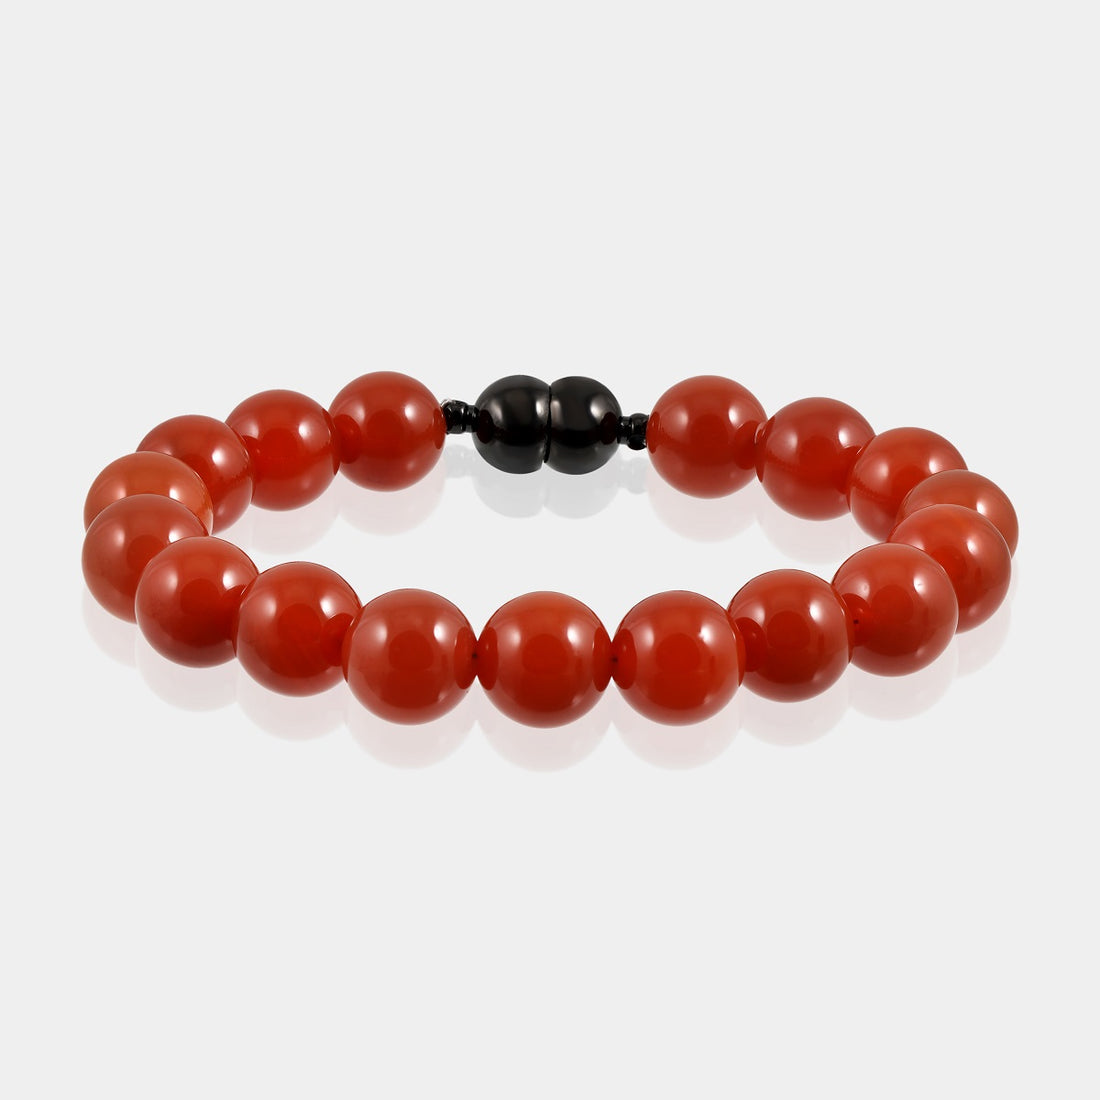 A close-up of a handmade bracelet featuring smooth round red onyx gemstone beads, showcasing their striking and alluring red color.